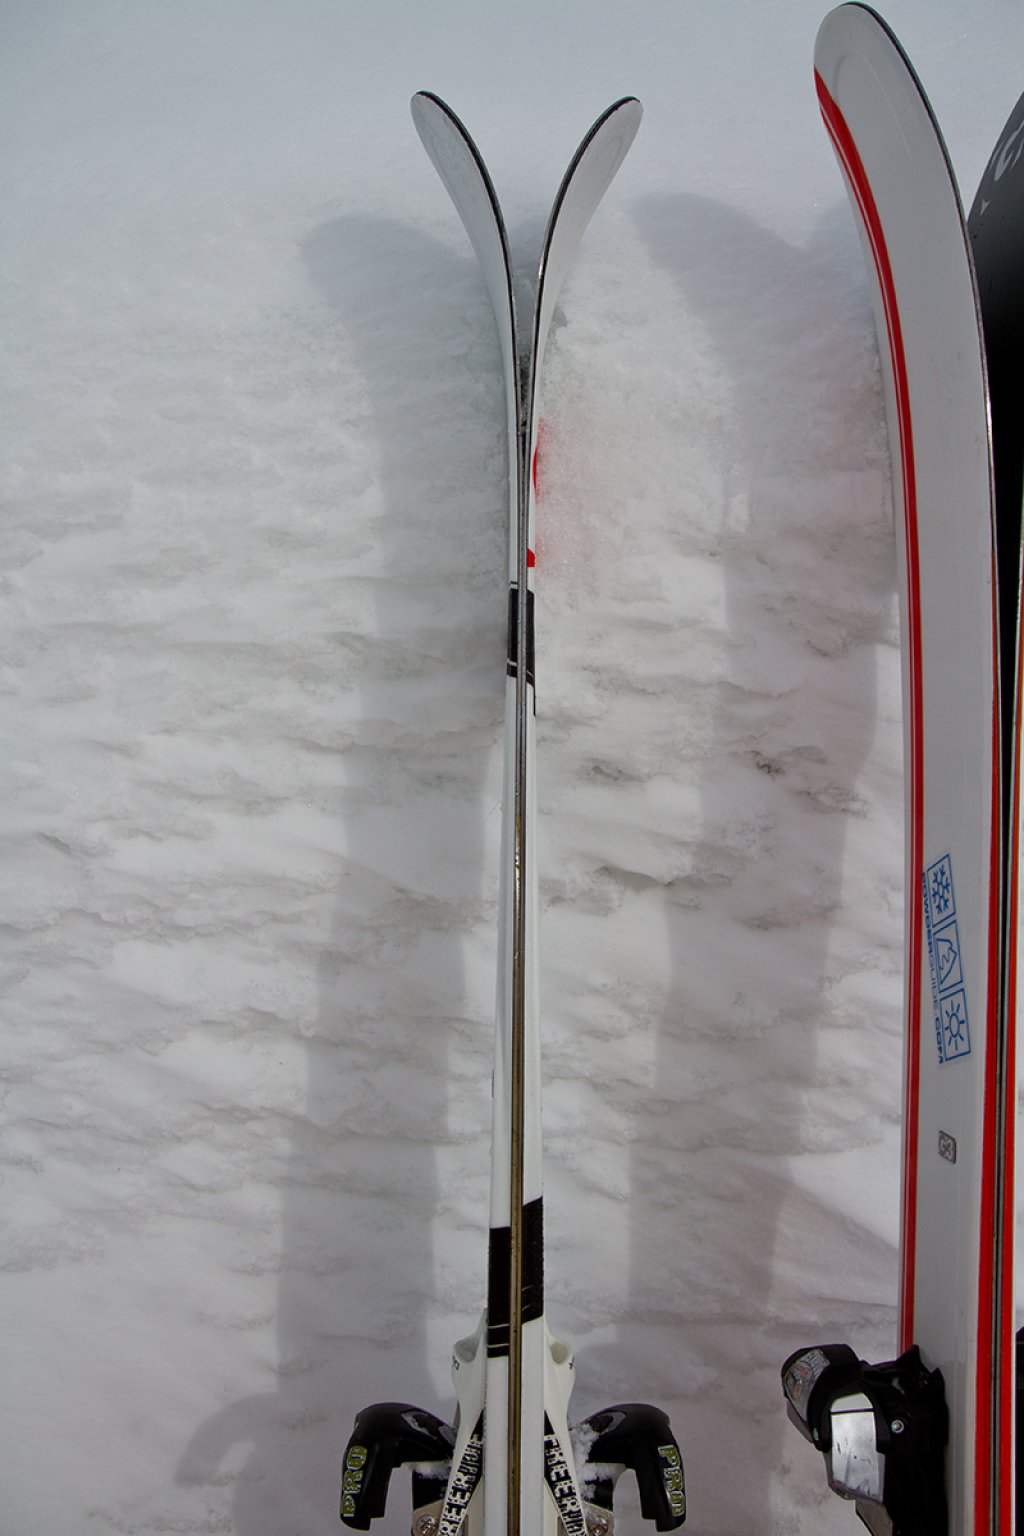 The front ski of the Zenoxide C3 105 (right) in detail